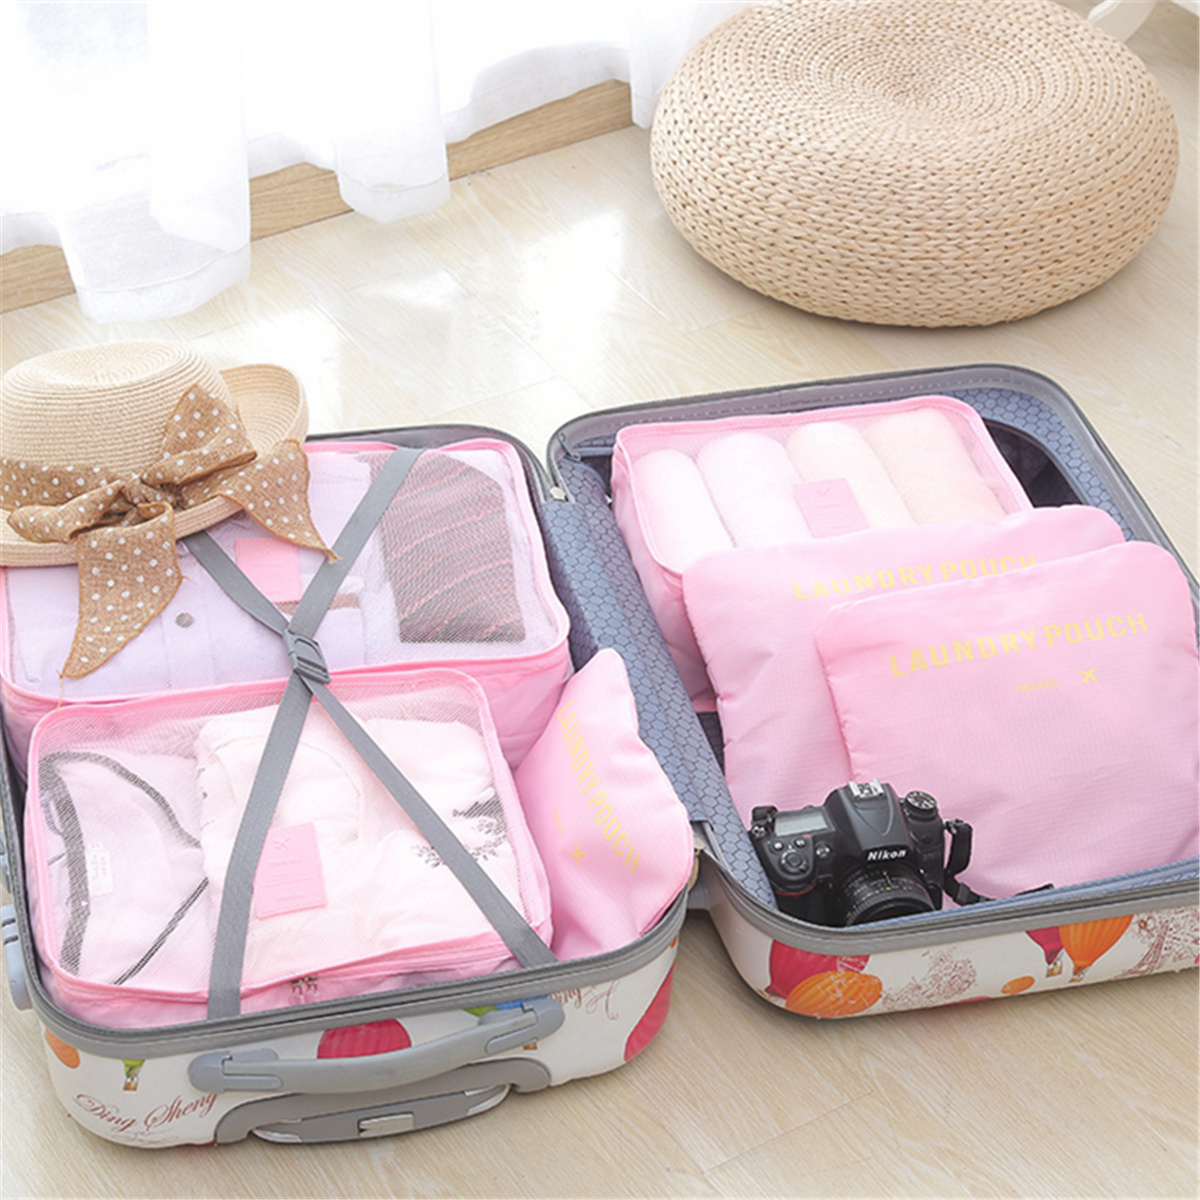 IPRee™ 6Pcs Travel Portable Storage Bag Set Clothes Packing Luggage Organizer Waterproof Pouch 15